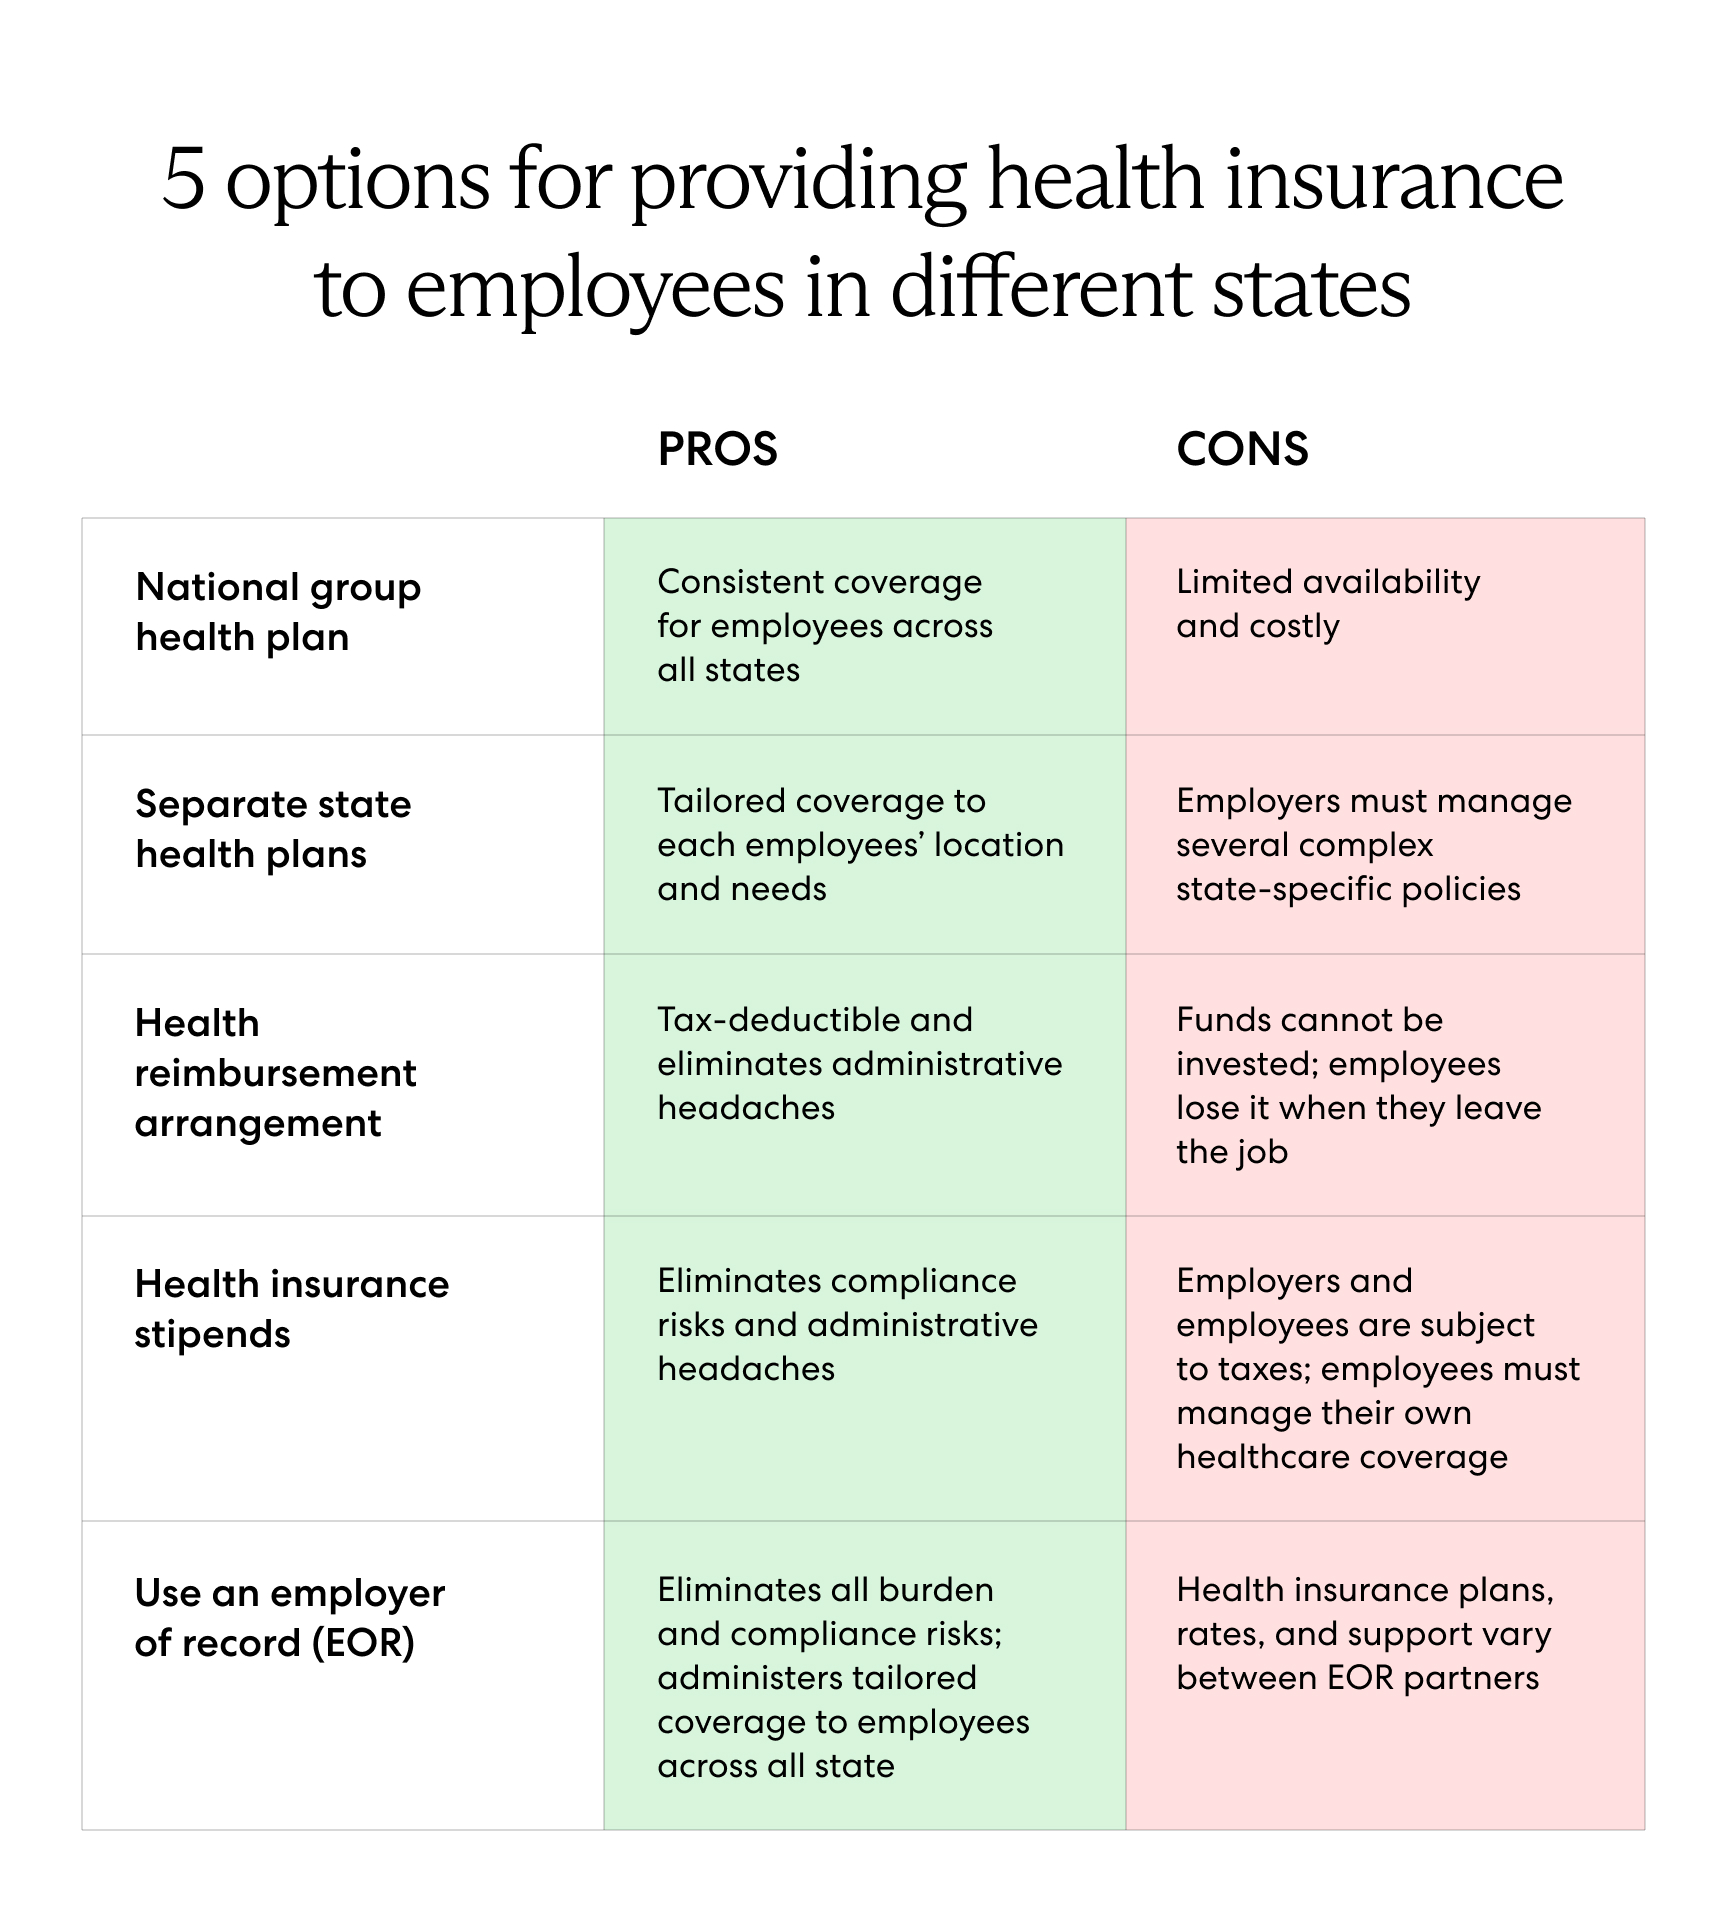 Chart comparing the pros and cons of five health insurance solutions for employees in different U.S. states.